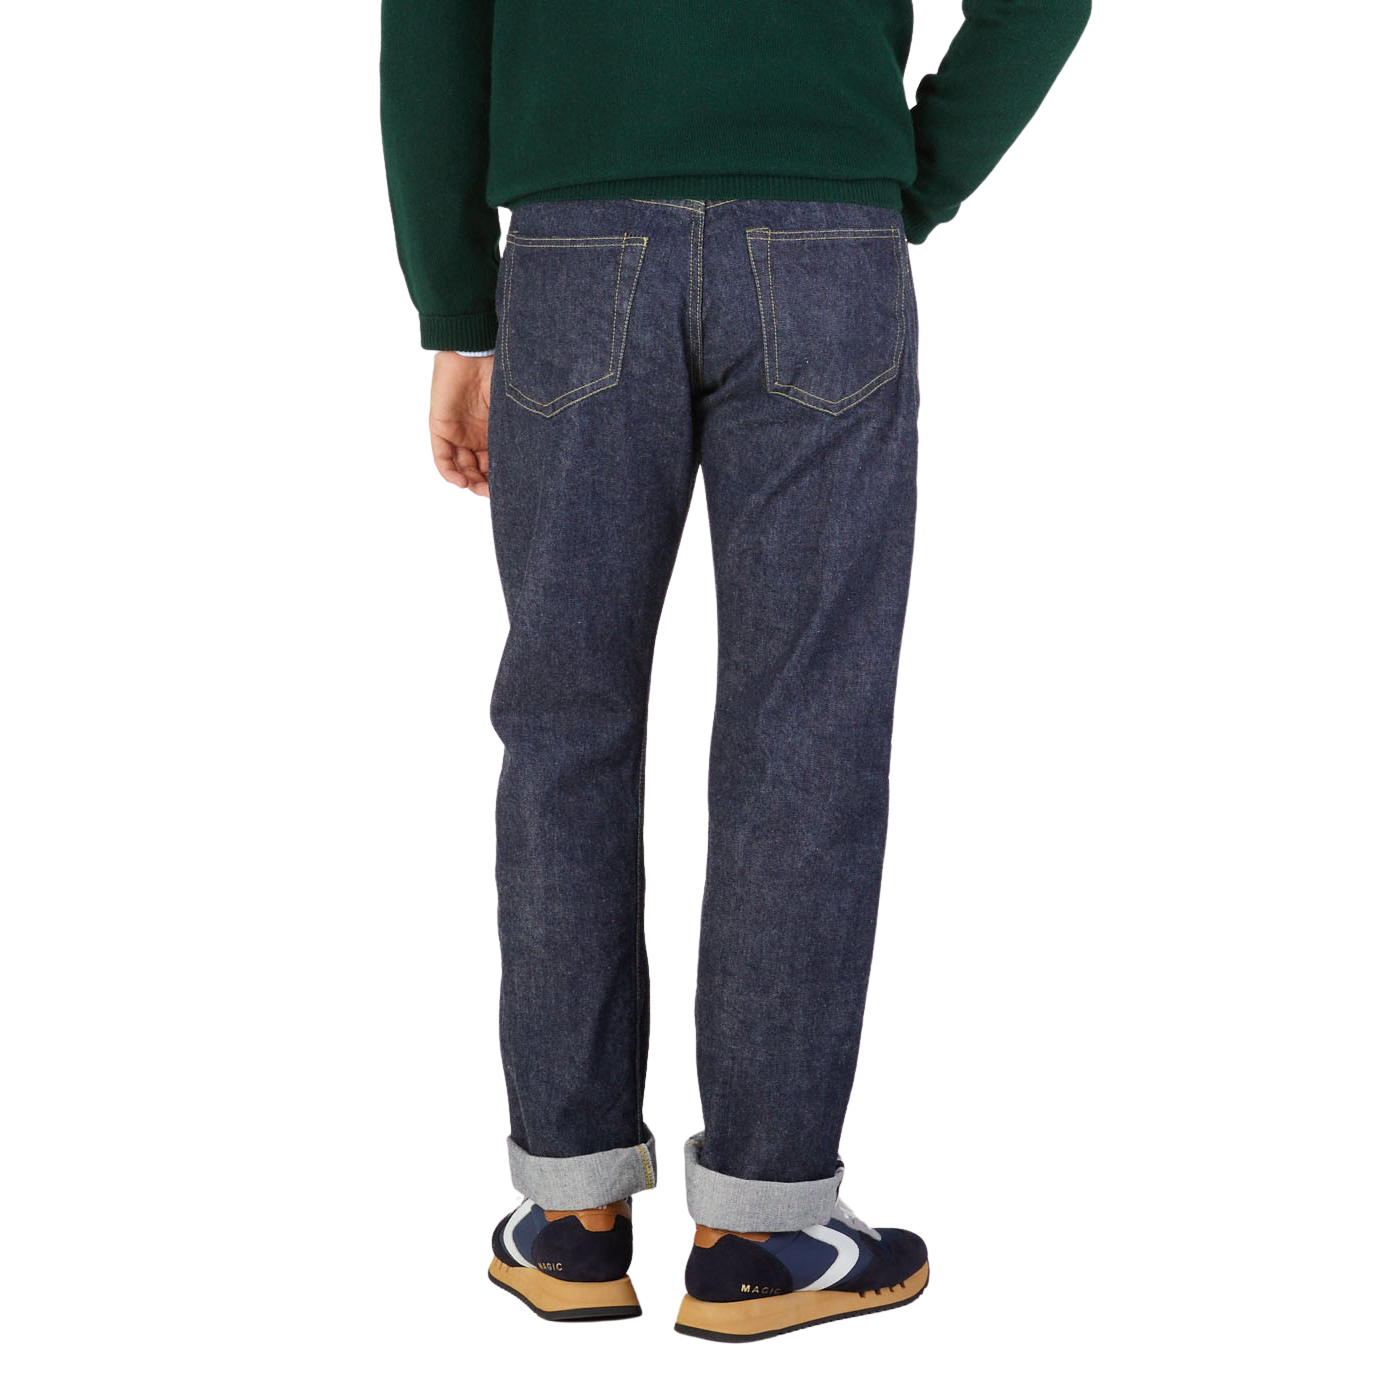 Rear view of a person wearing Resolute's Dark Blue Cotton 714 One Wash Jeans and multicolored sneakers, with a green sweater tucked in.